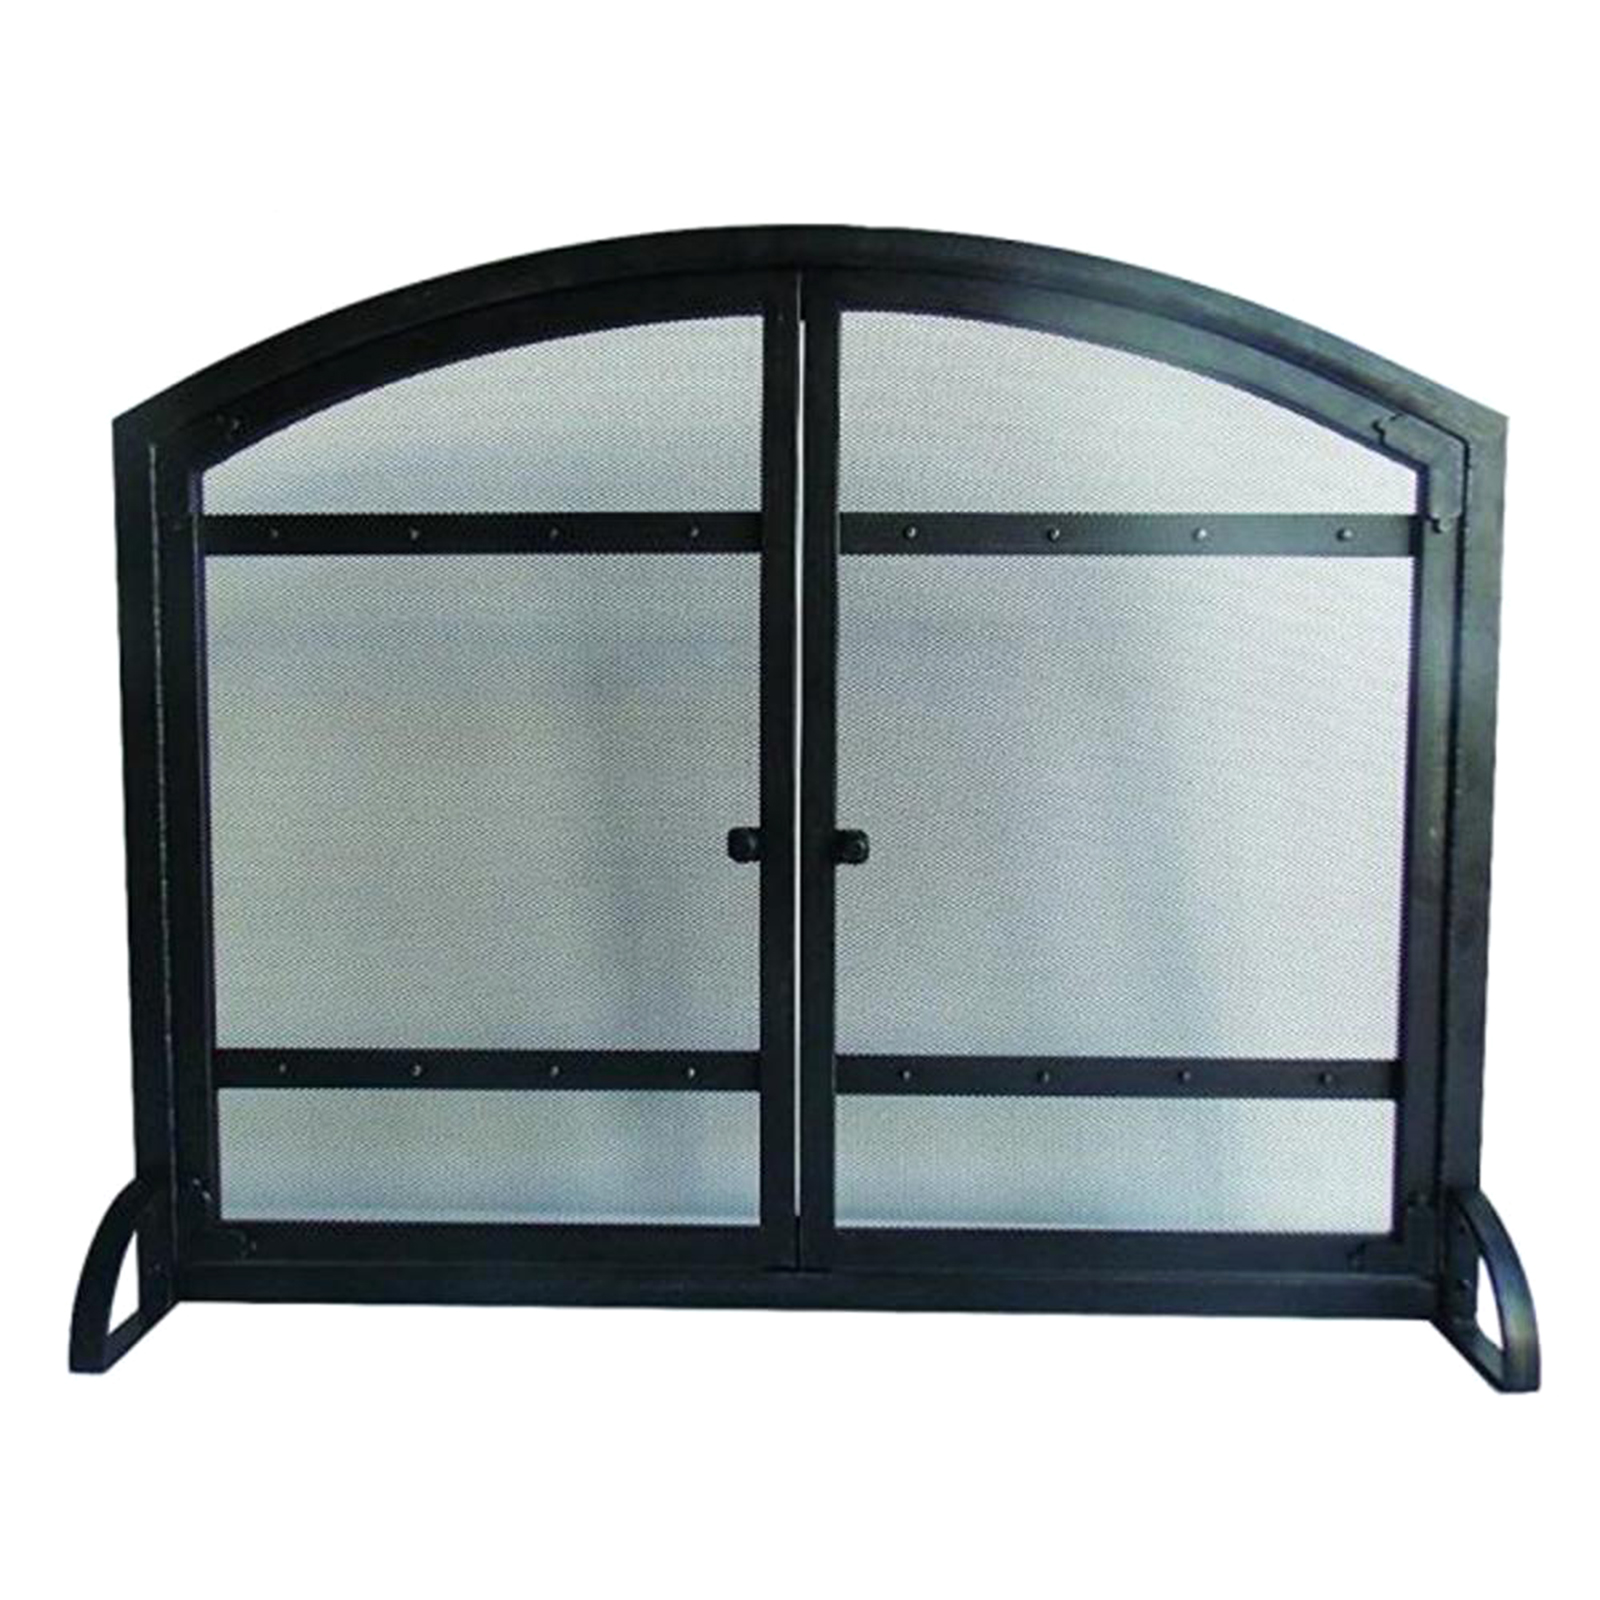 Pleasant Hearth Harper Arched 39" Fireplace Screen with Doors - Black